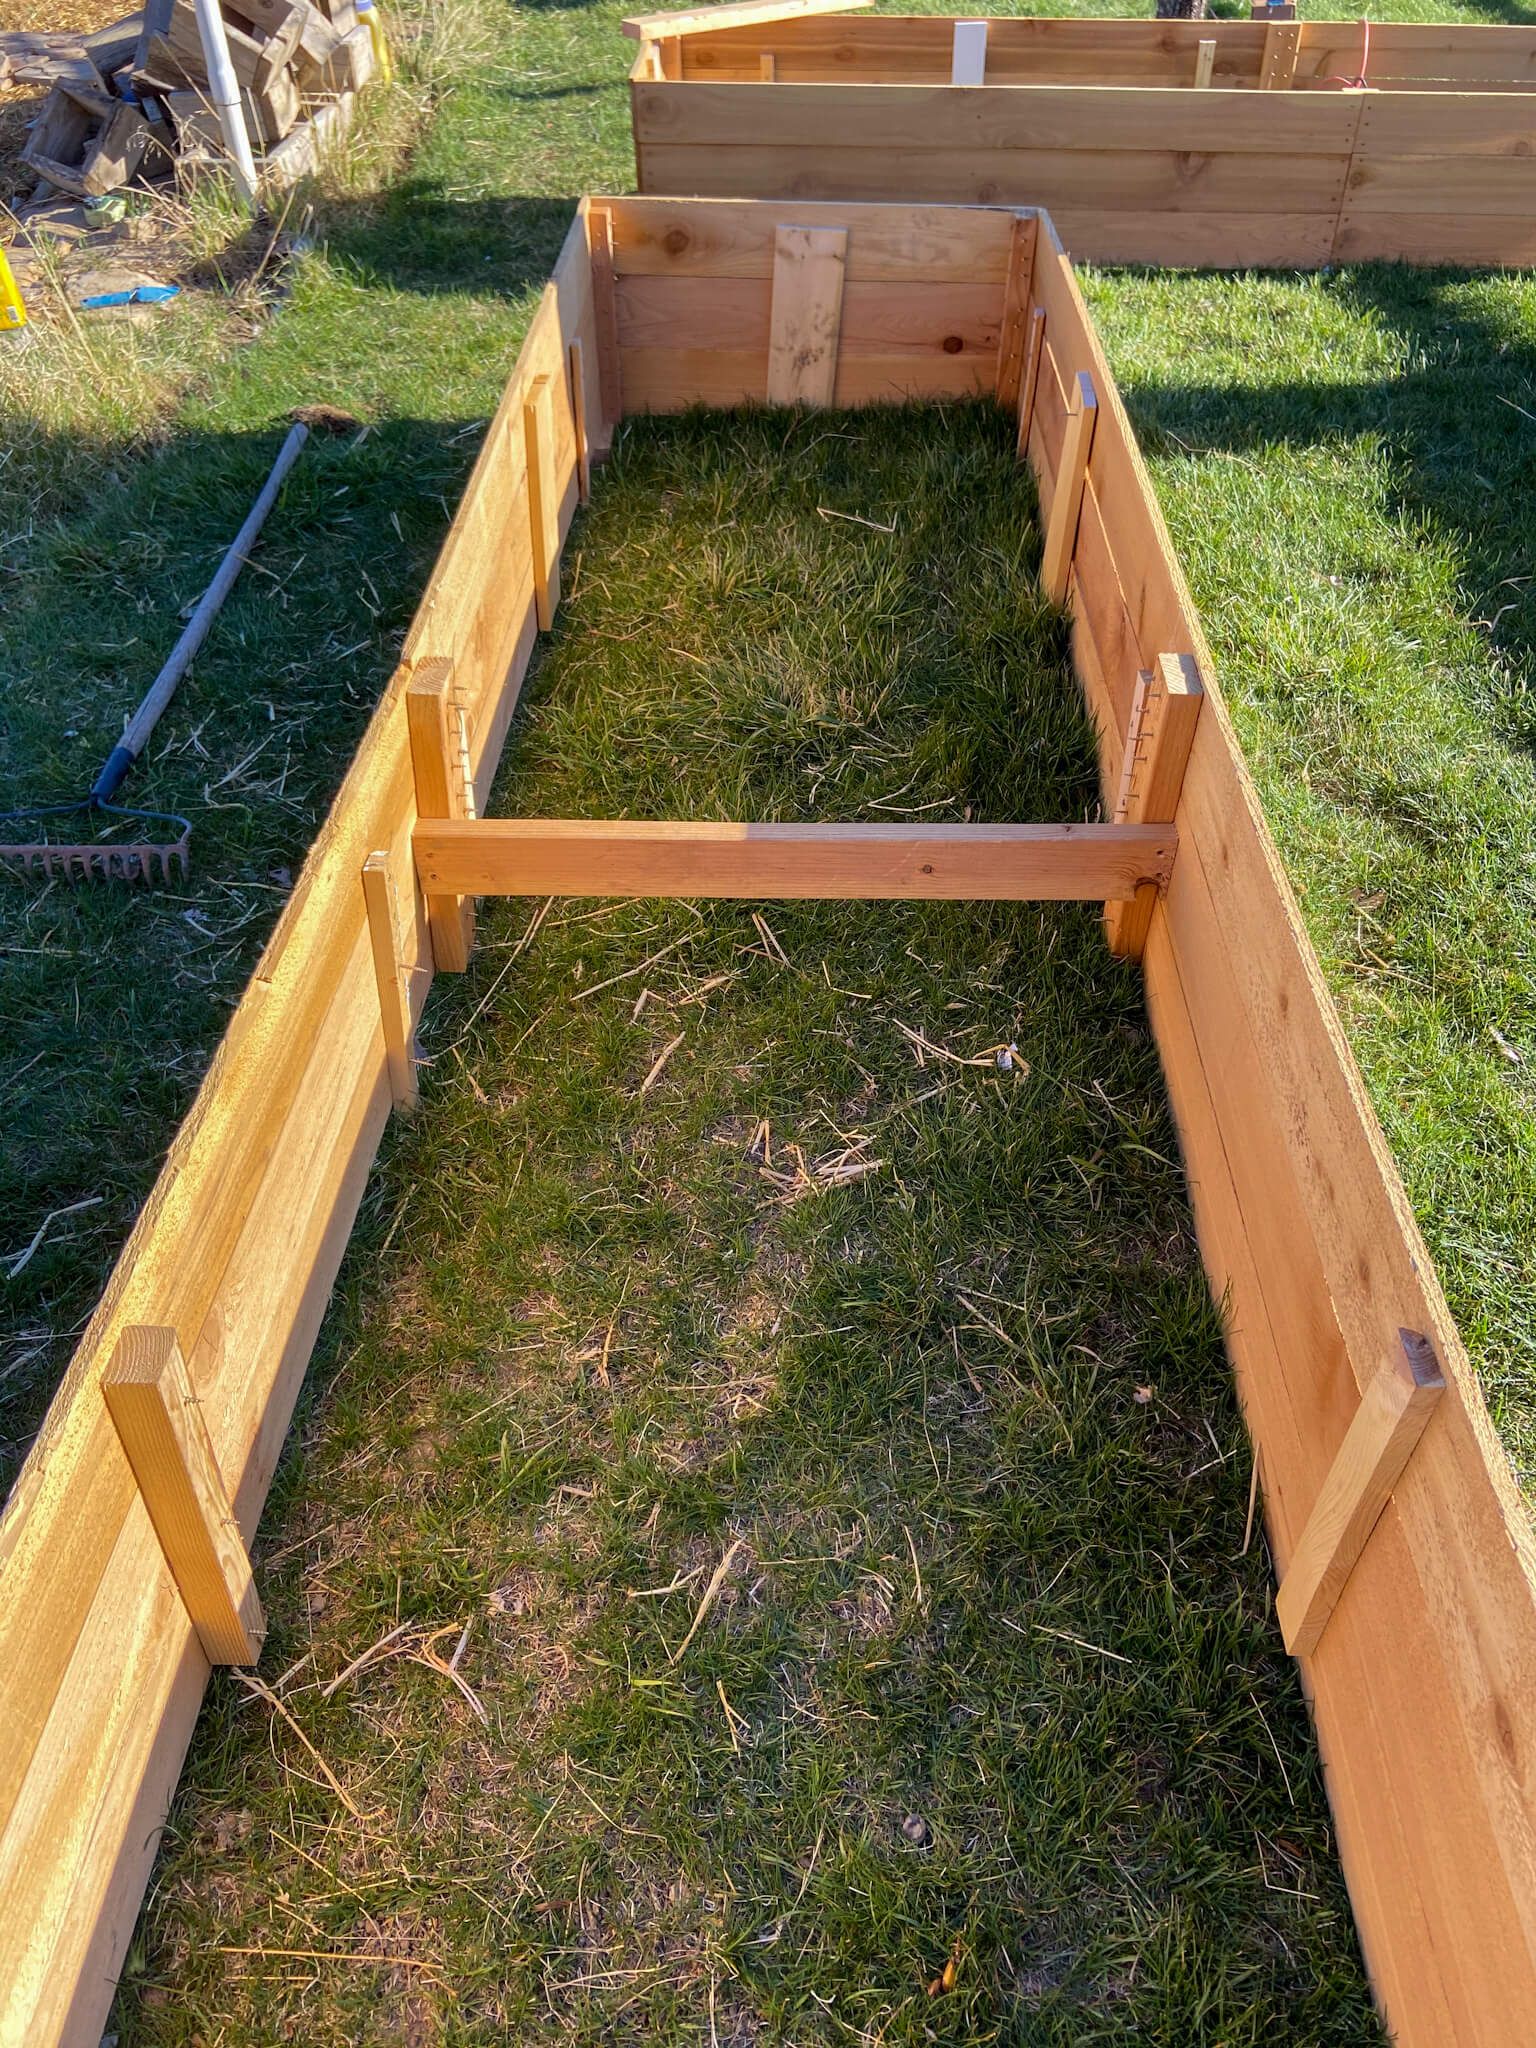 Creating Your Own Wooden Garden Planter Boxes from Scratch